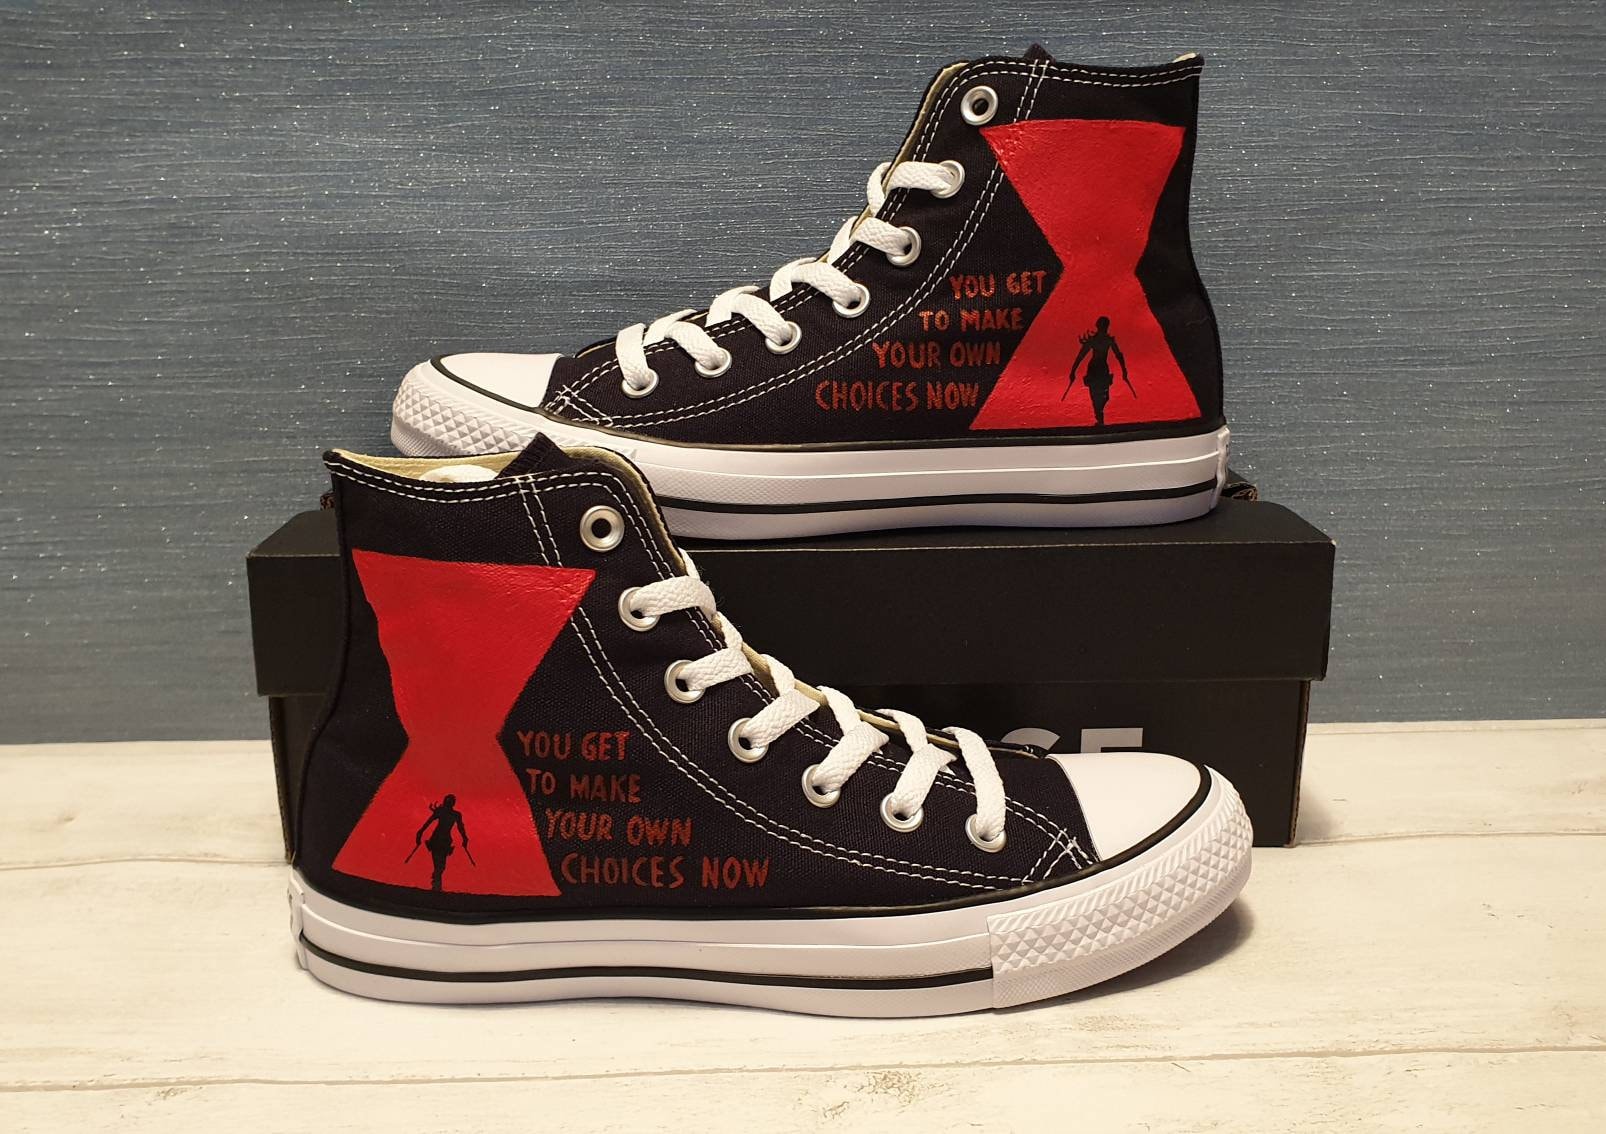 Converse branded Custom Hand Painted Shoes Marvels Black Widow Themed High Top Shoes Shoes Womens Shoes Sneakers & Athletic Shoes 